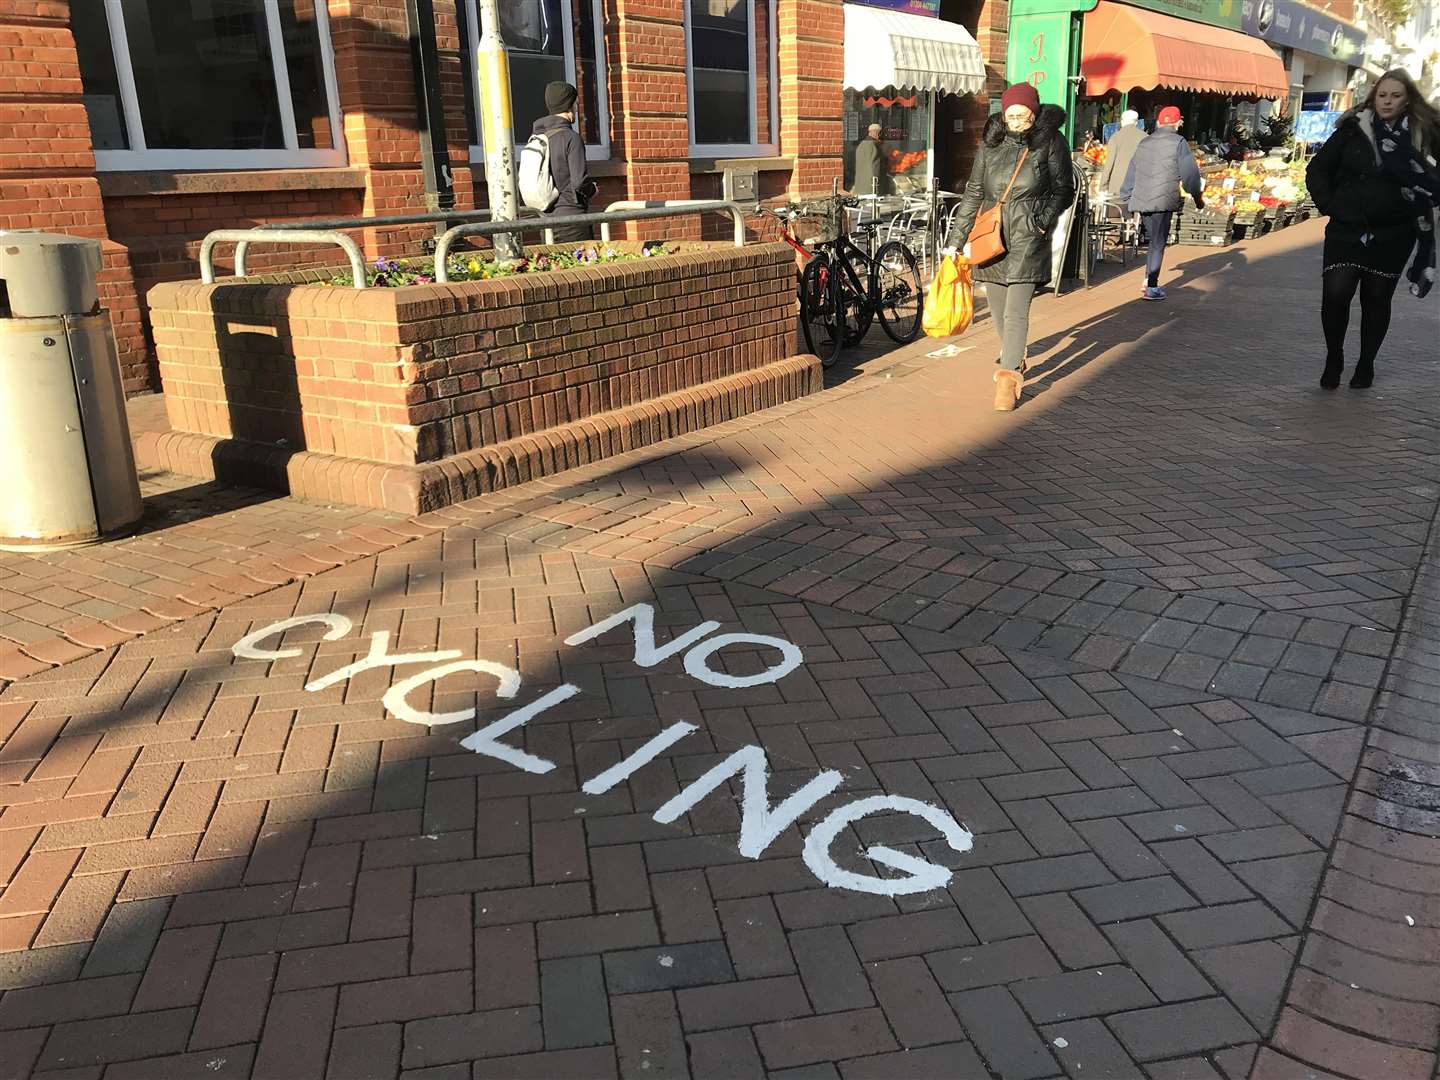 The new sign warns people that cycling is prohibited